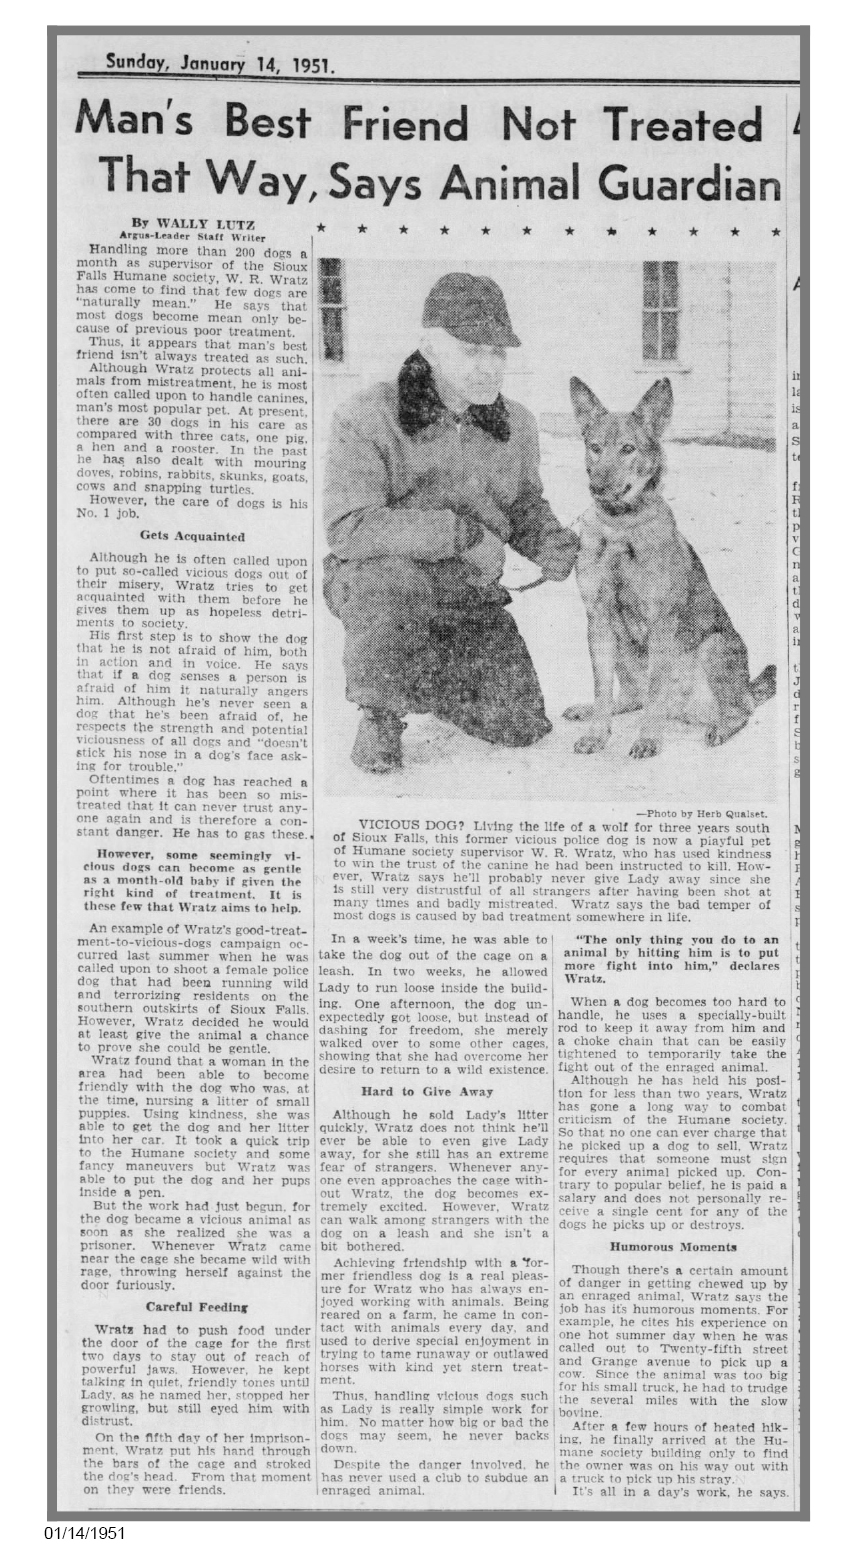 Sioux Falls Area Humane Society - History - Sioux Falls Area Humane Society